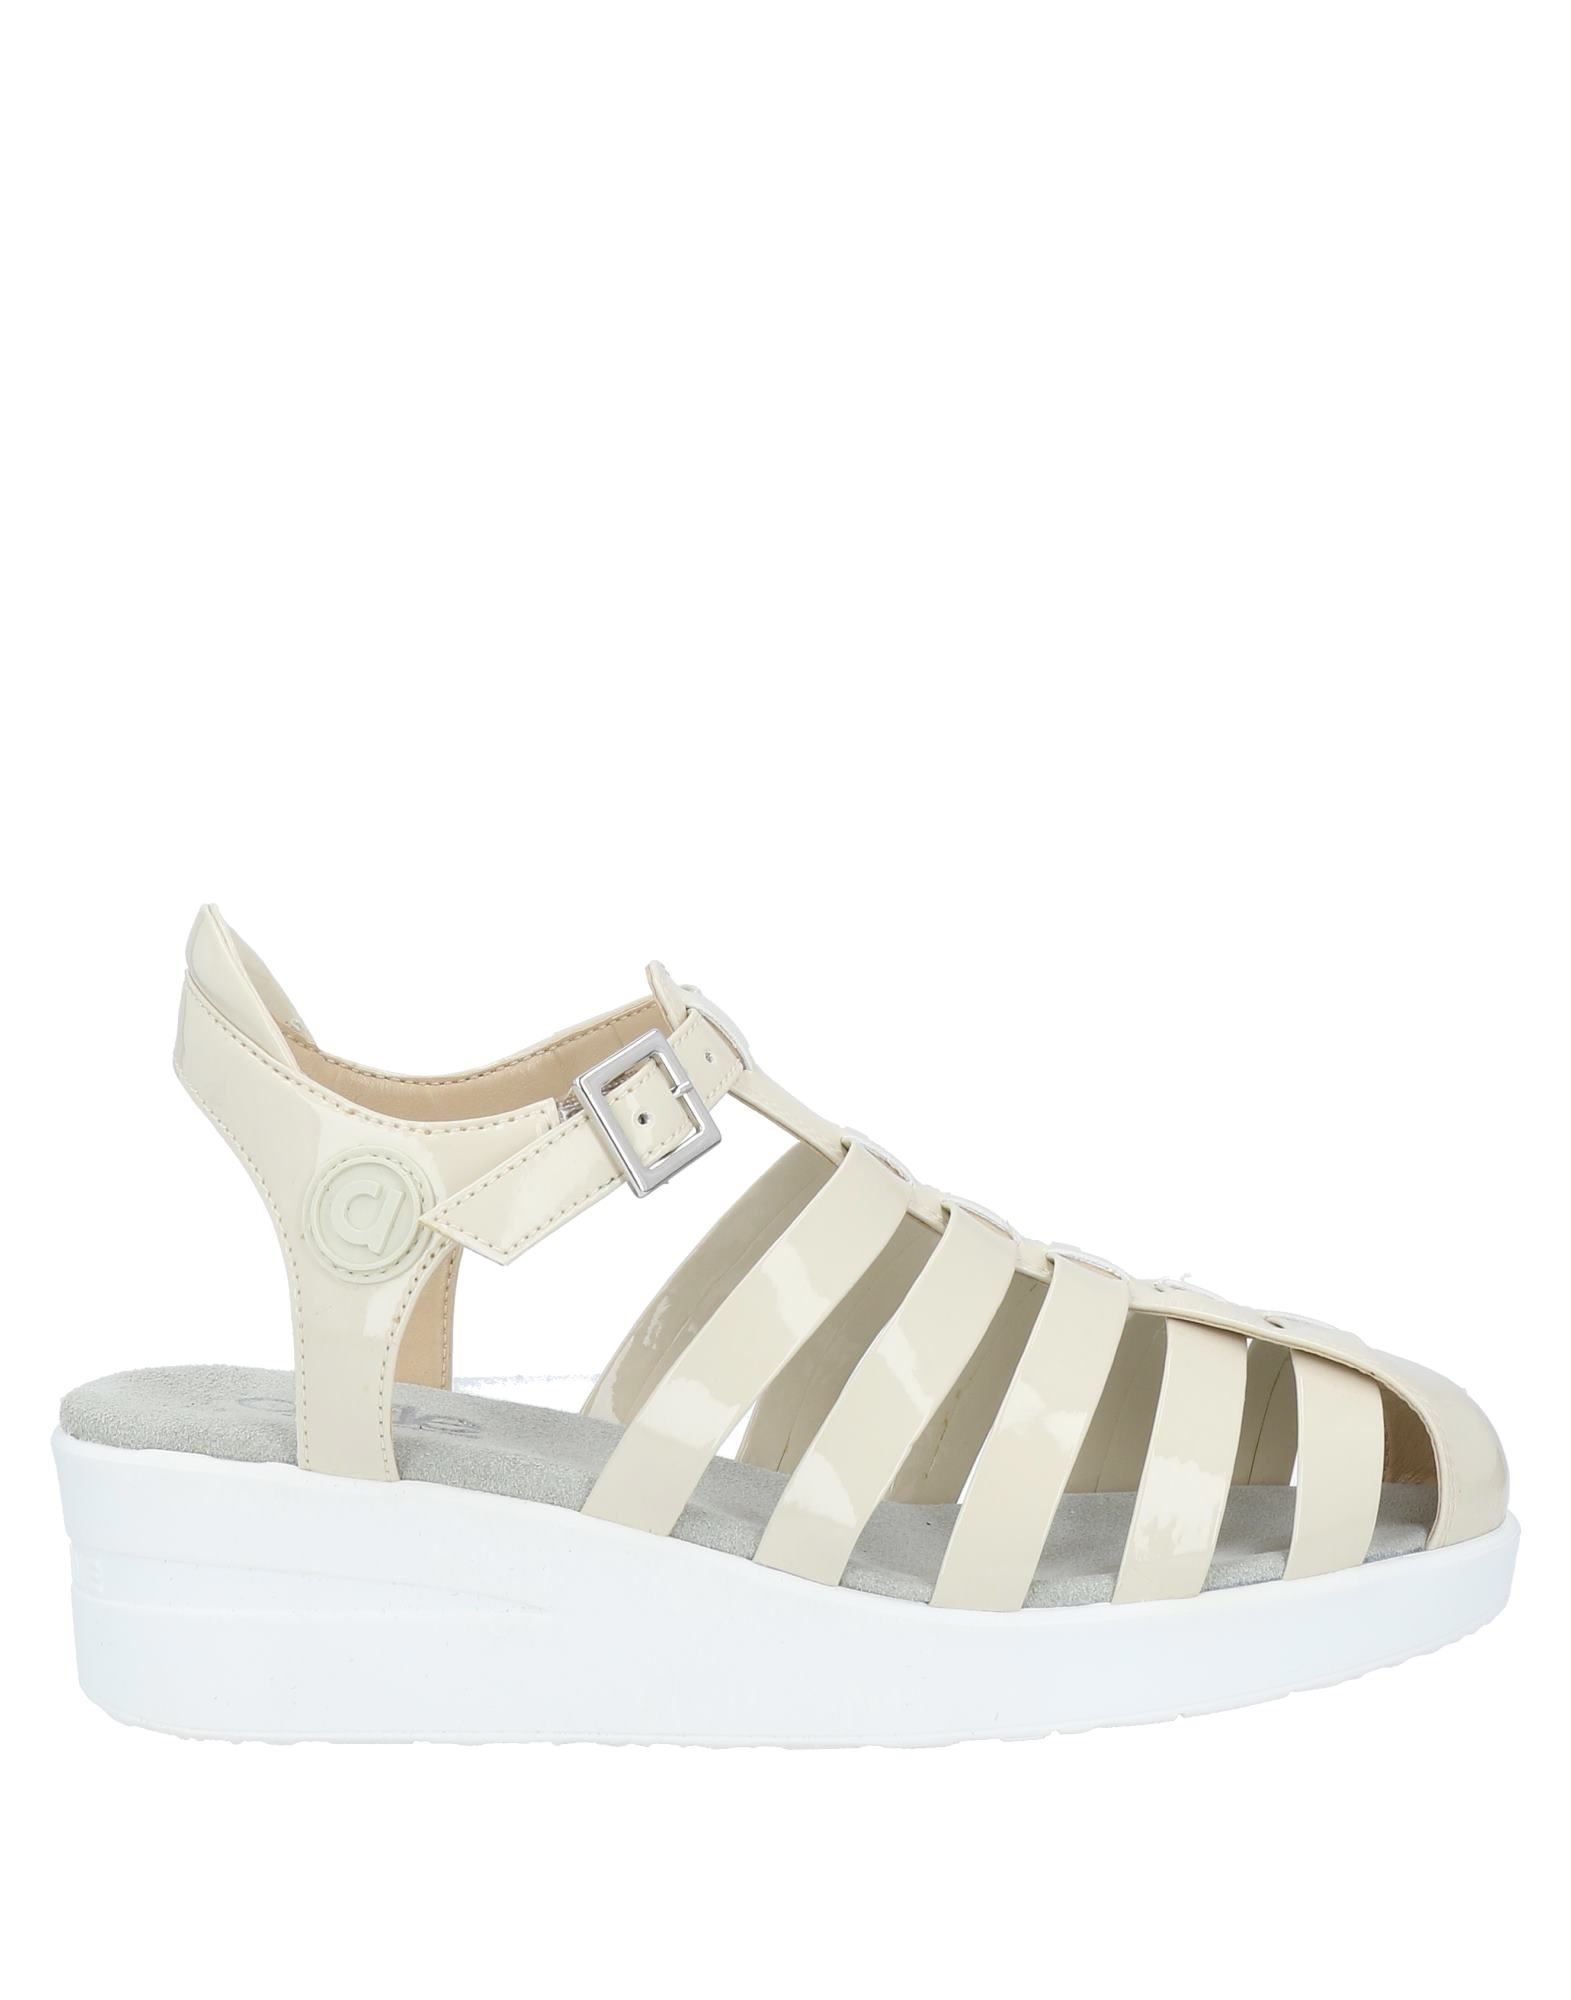 Agile By Rucoline Sandals In Beige